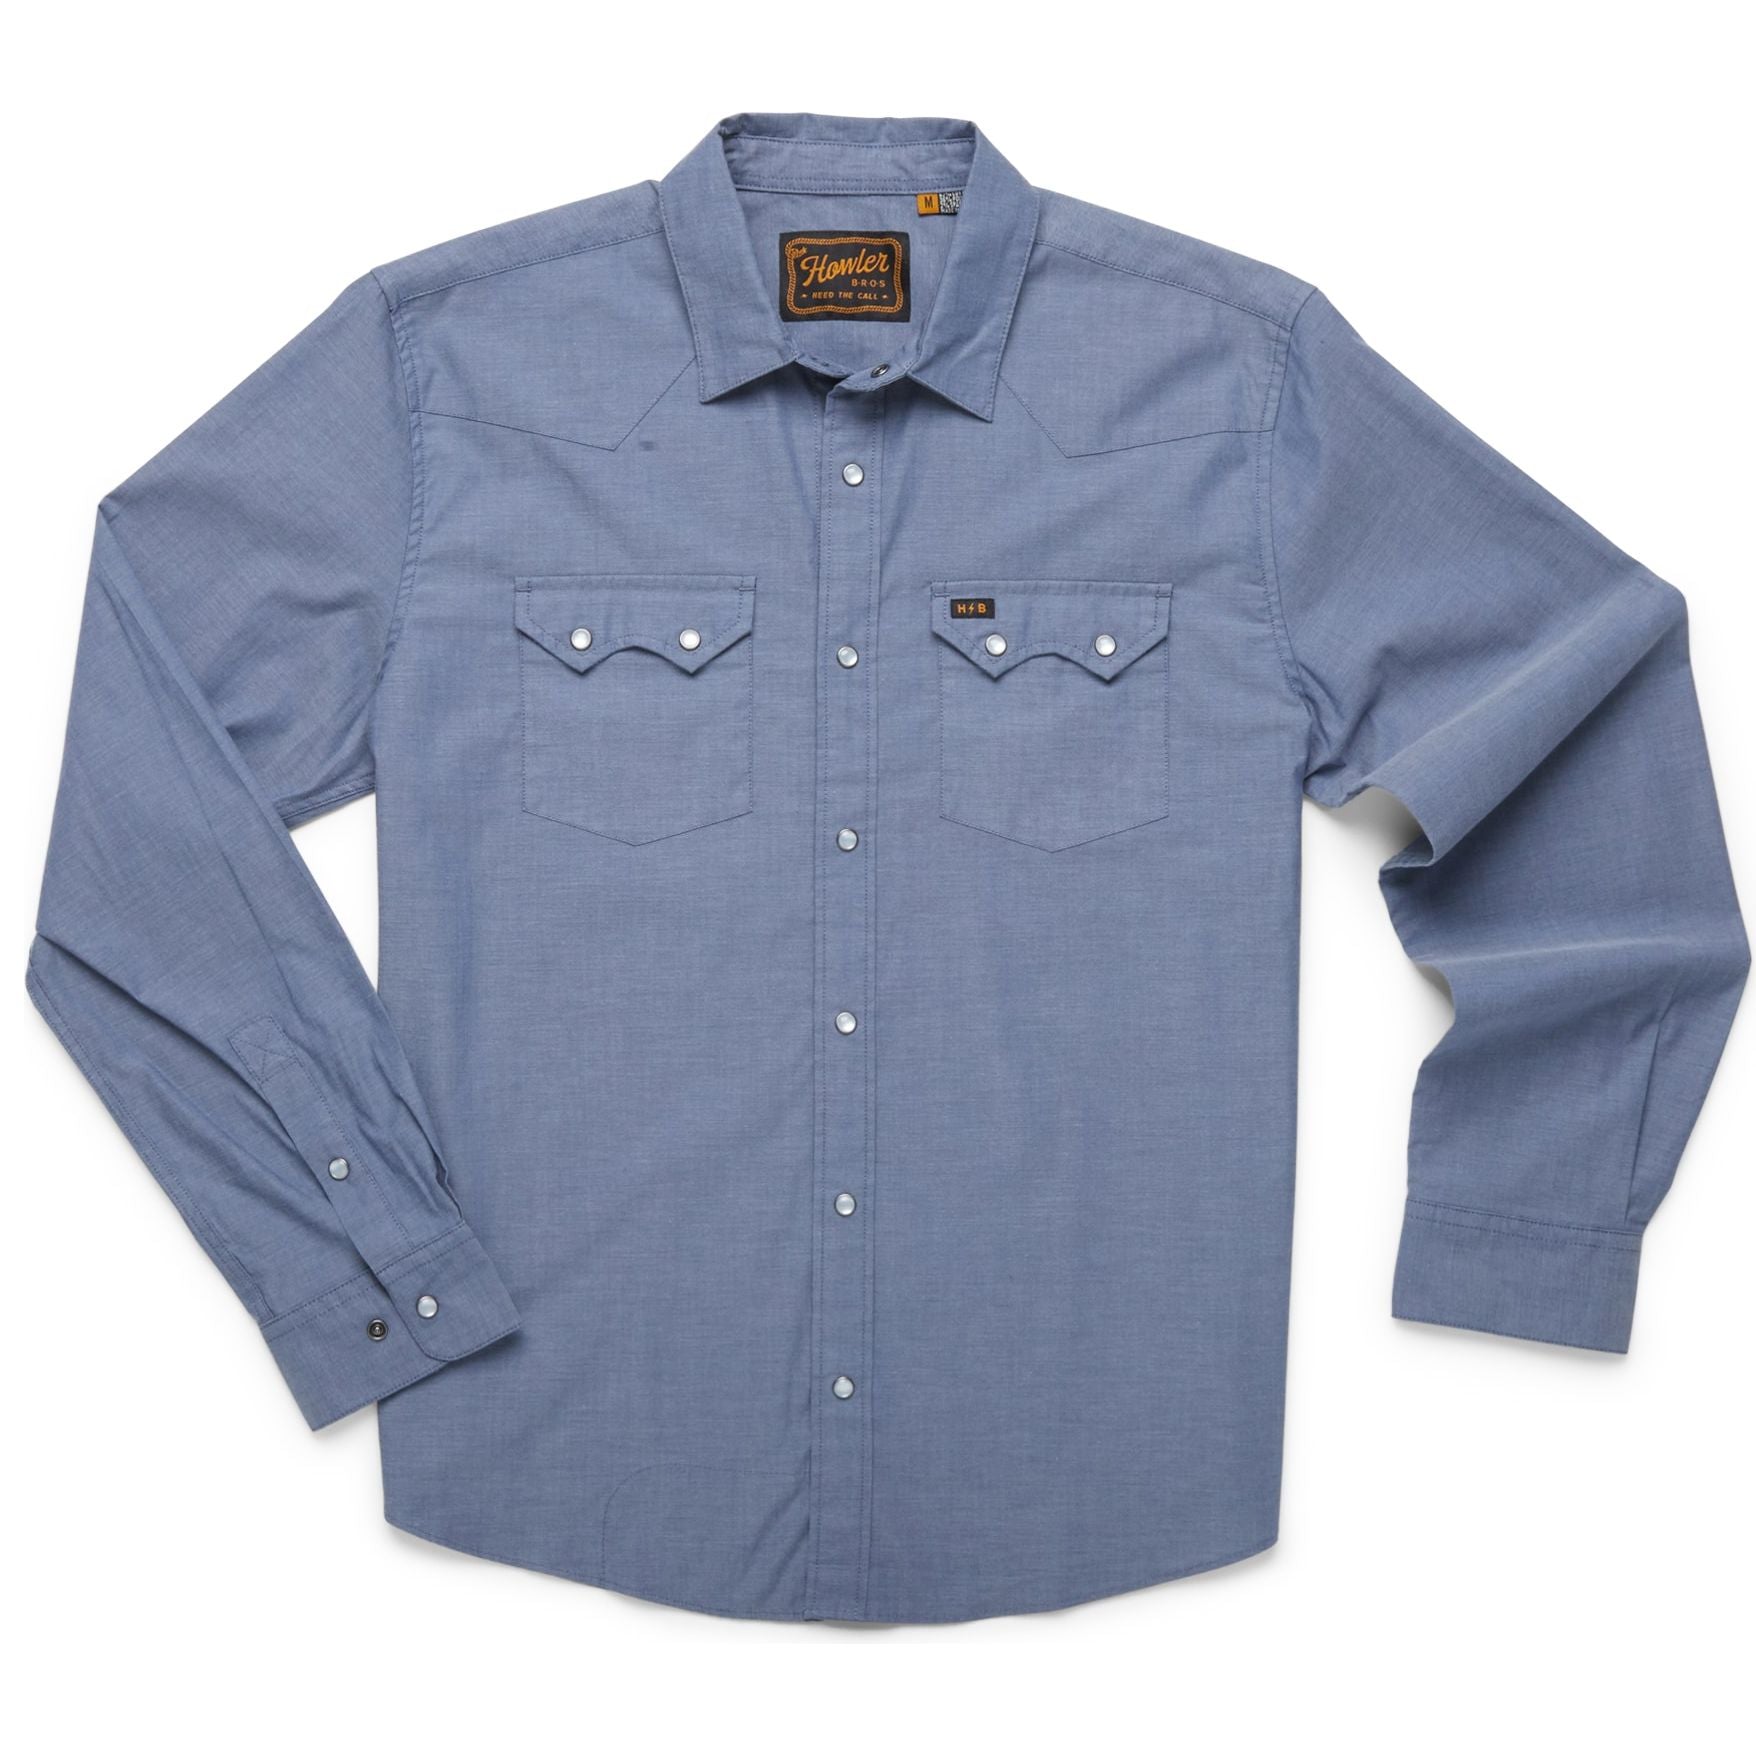 Howler Brothers Crosscut Snapshirt Classic Blue Chambray Image 1